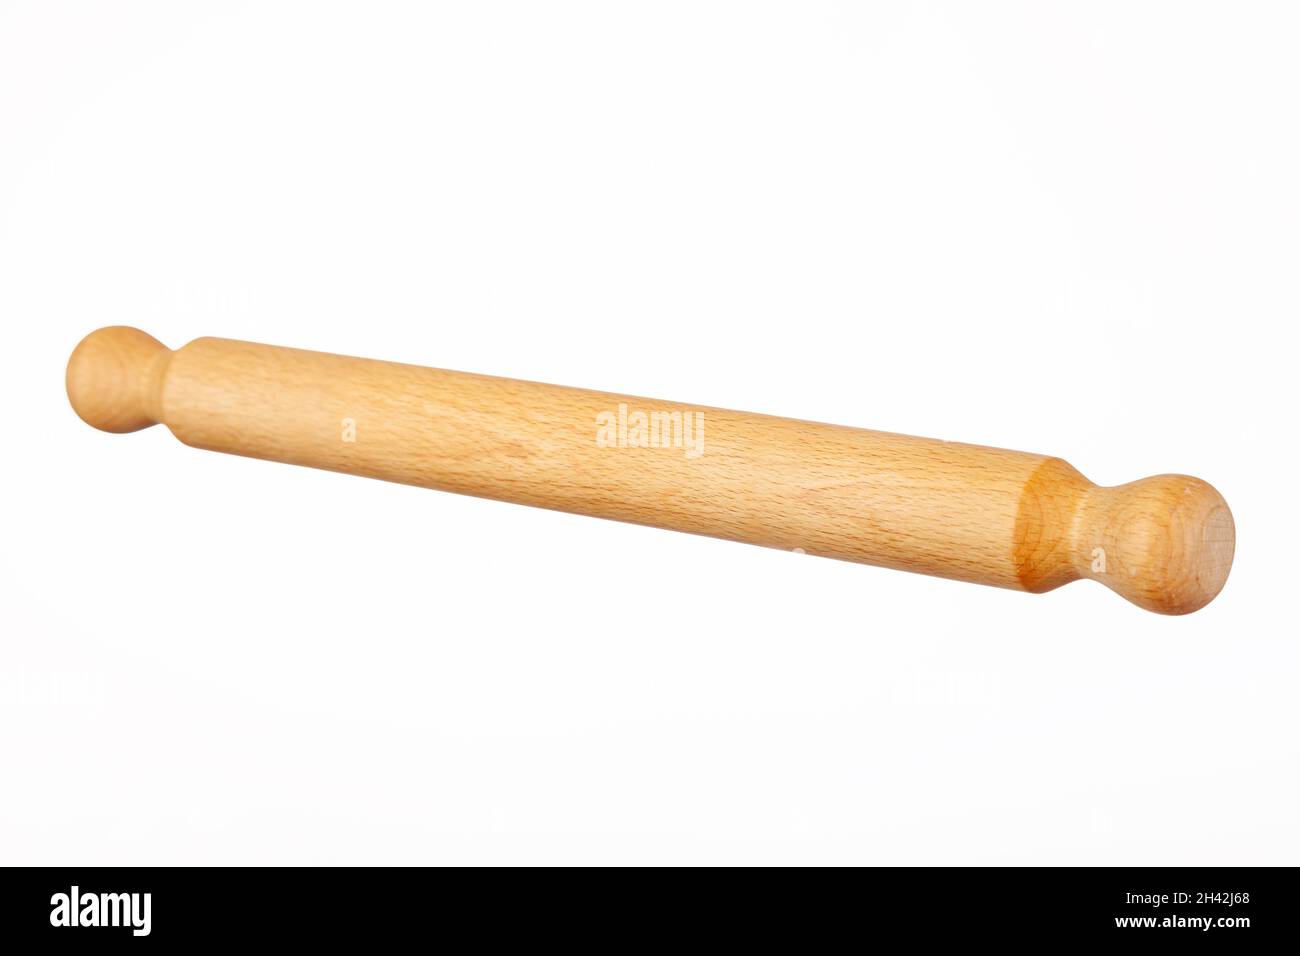 A wooden rolling pin on a white background Stock Photo